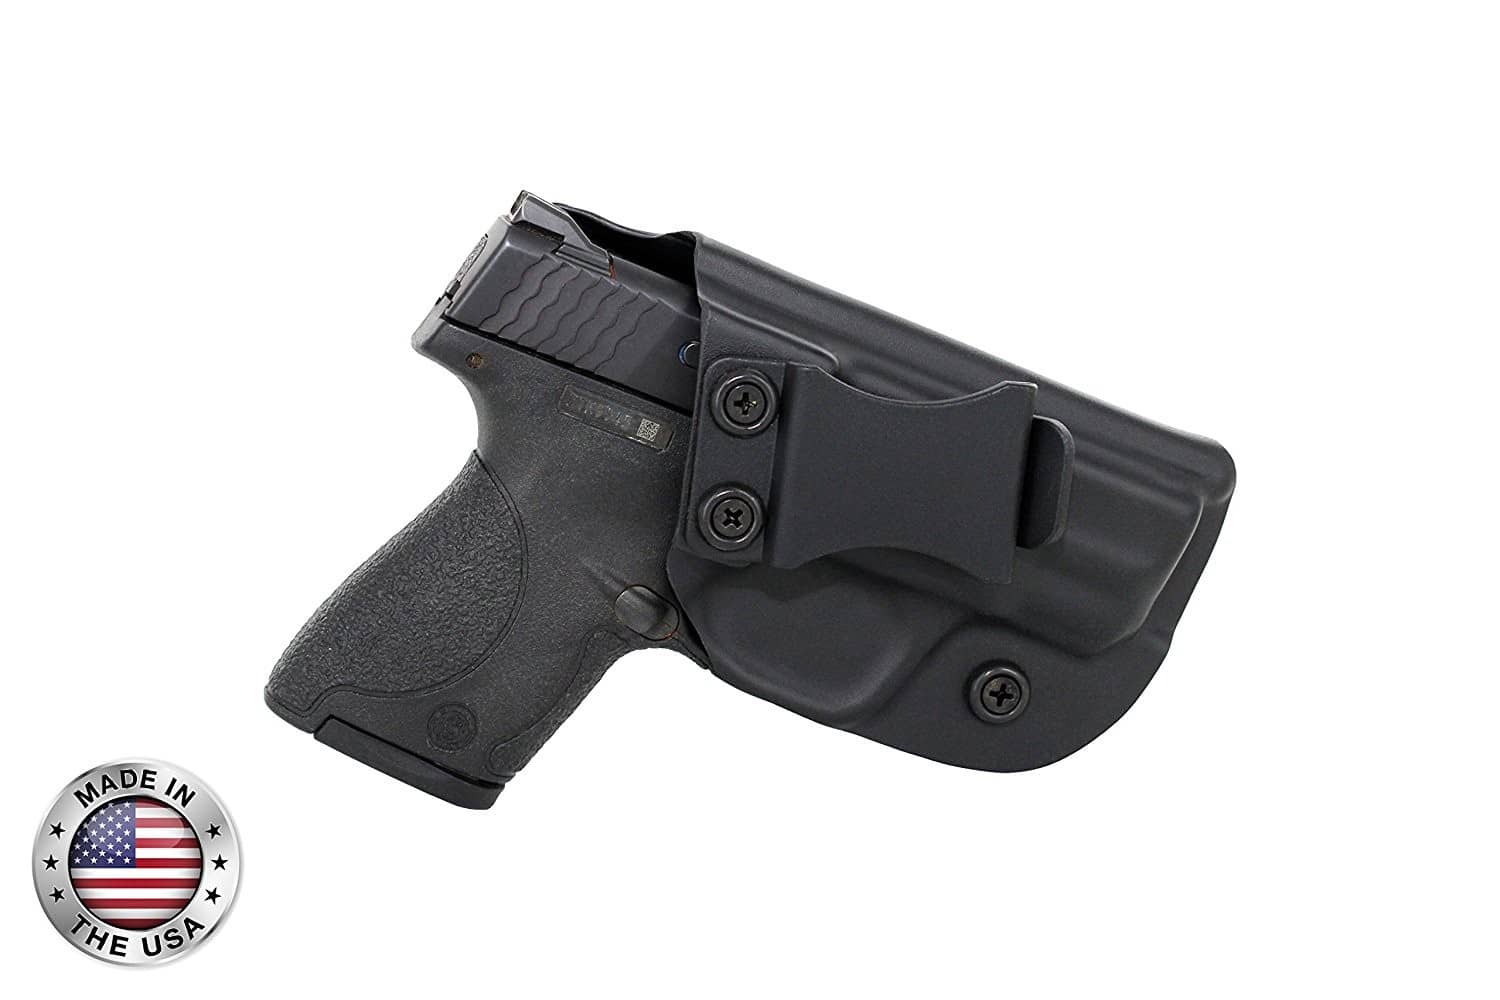 4 Best Kydex Holsters For Handguns and Pistols